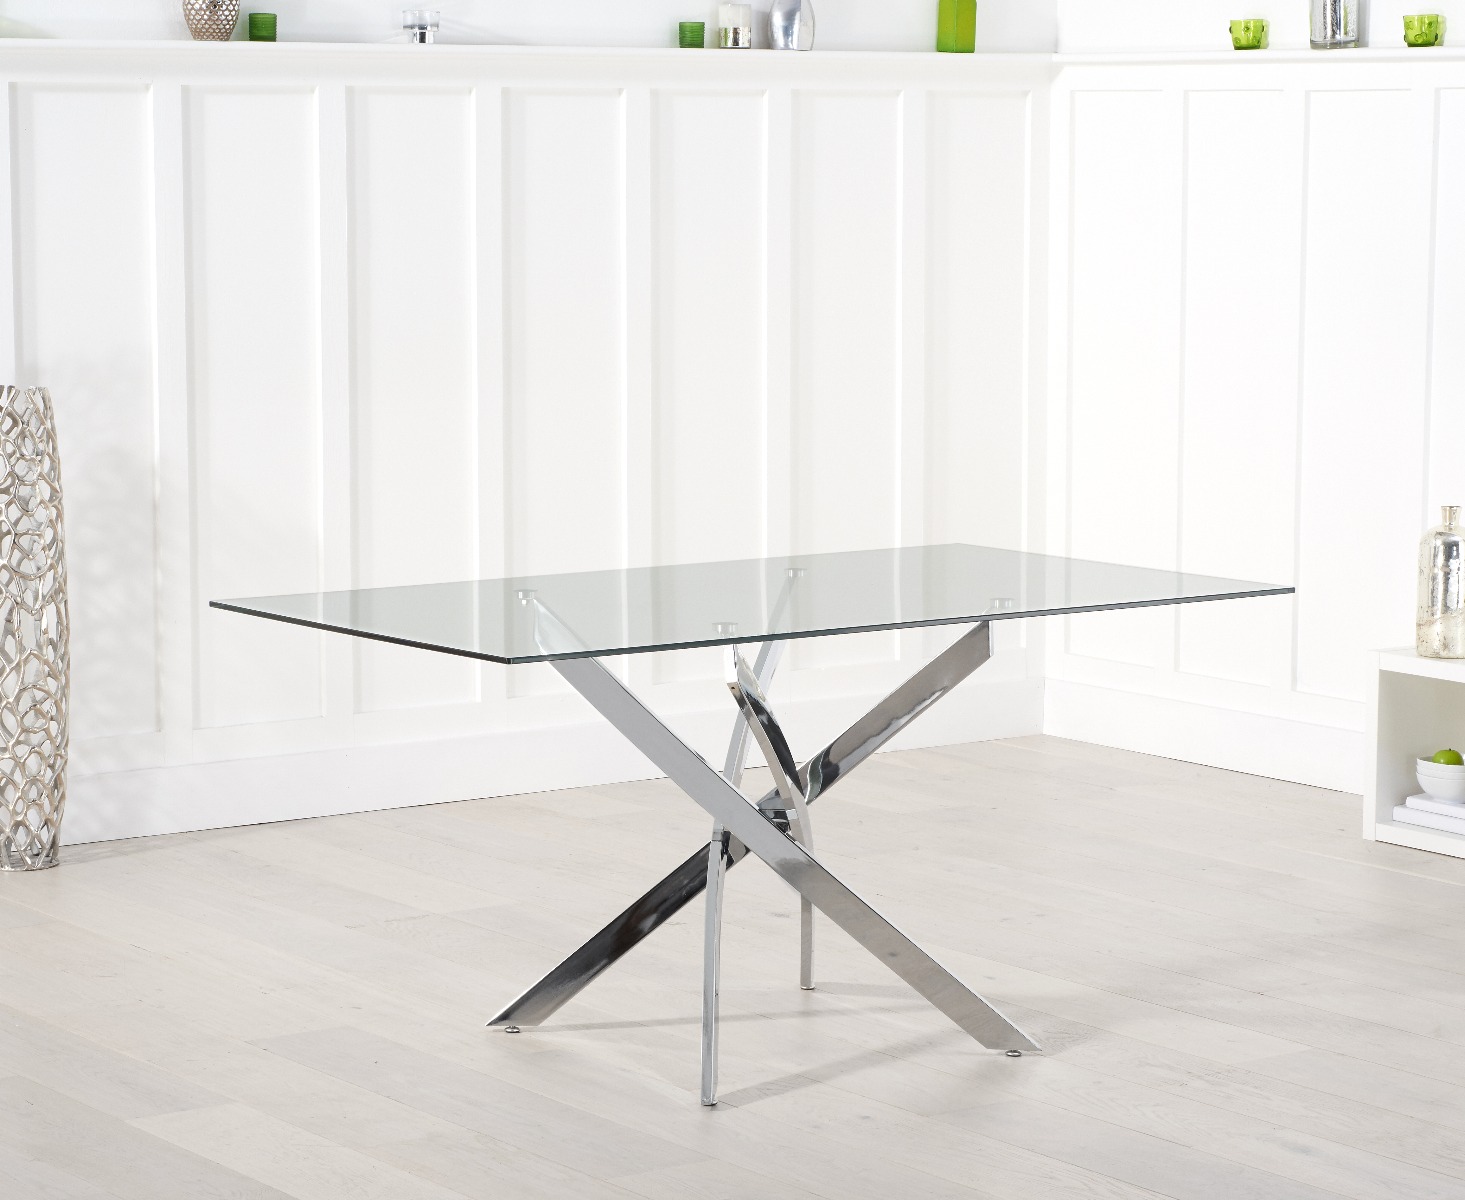 Photo 5 of Denver 160cm glass dining table with 8 grey gianni chairs